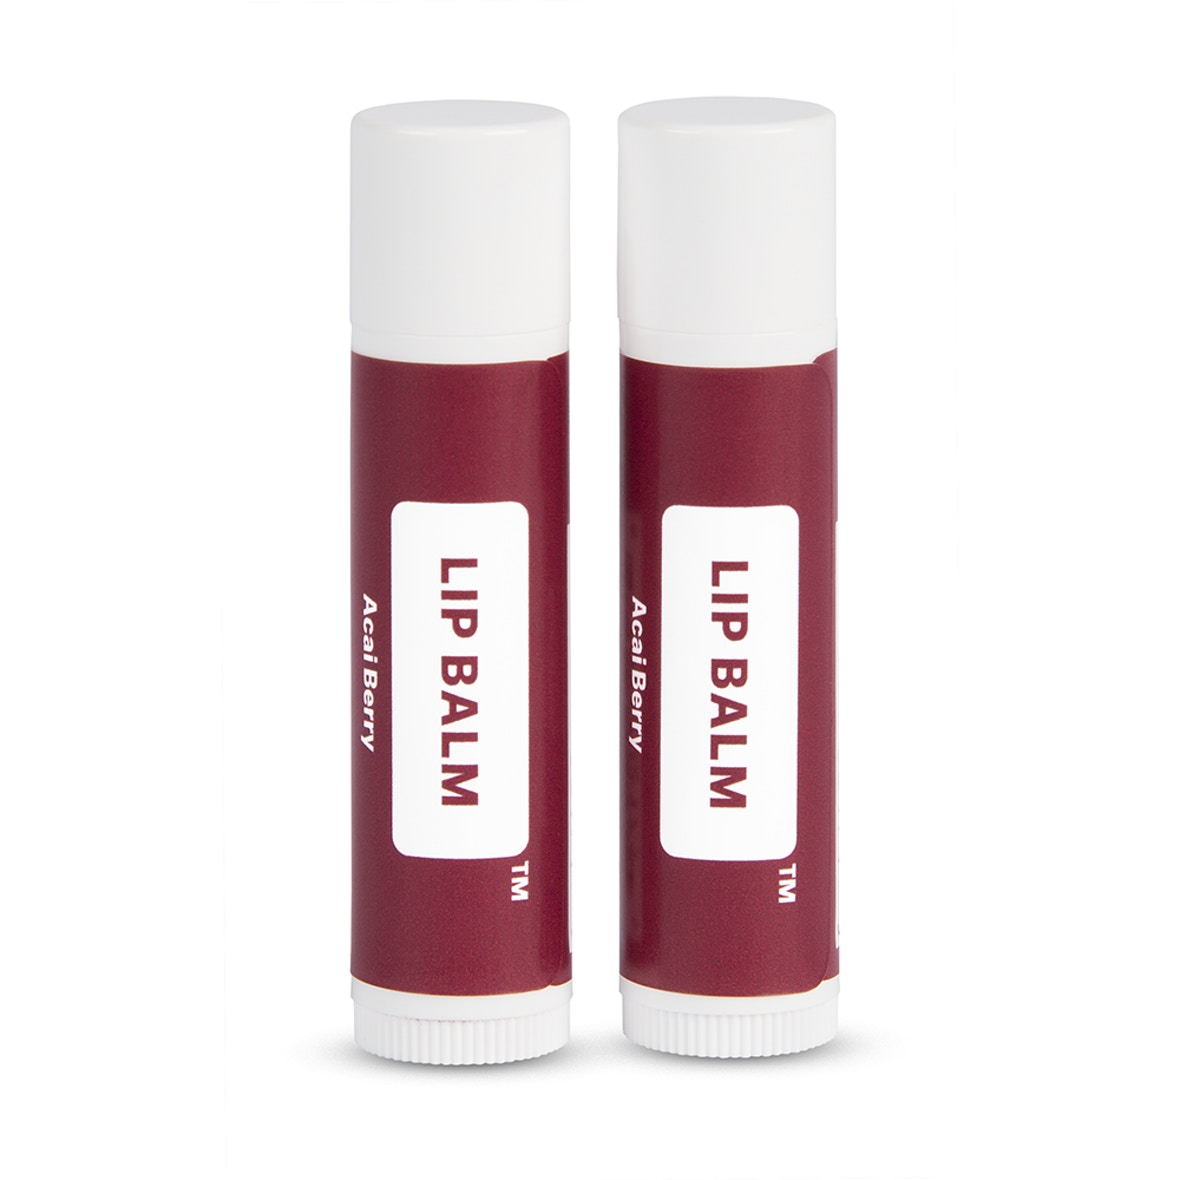 Global Lip Balm Market Analysis, Growth Opportunities in 2019 and Forecast up to 2025